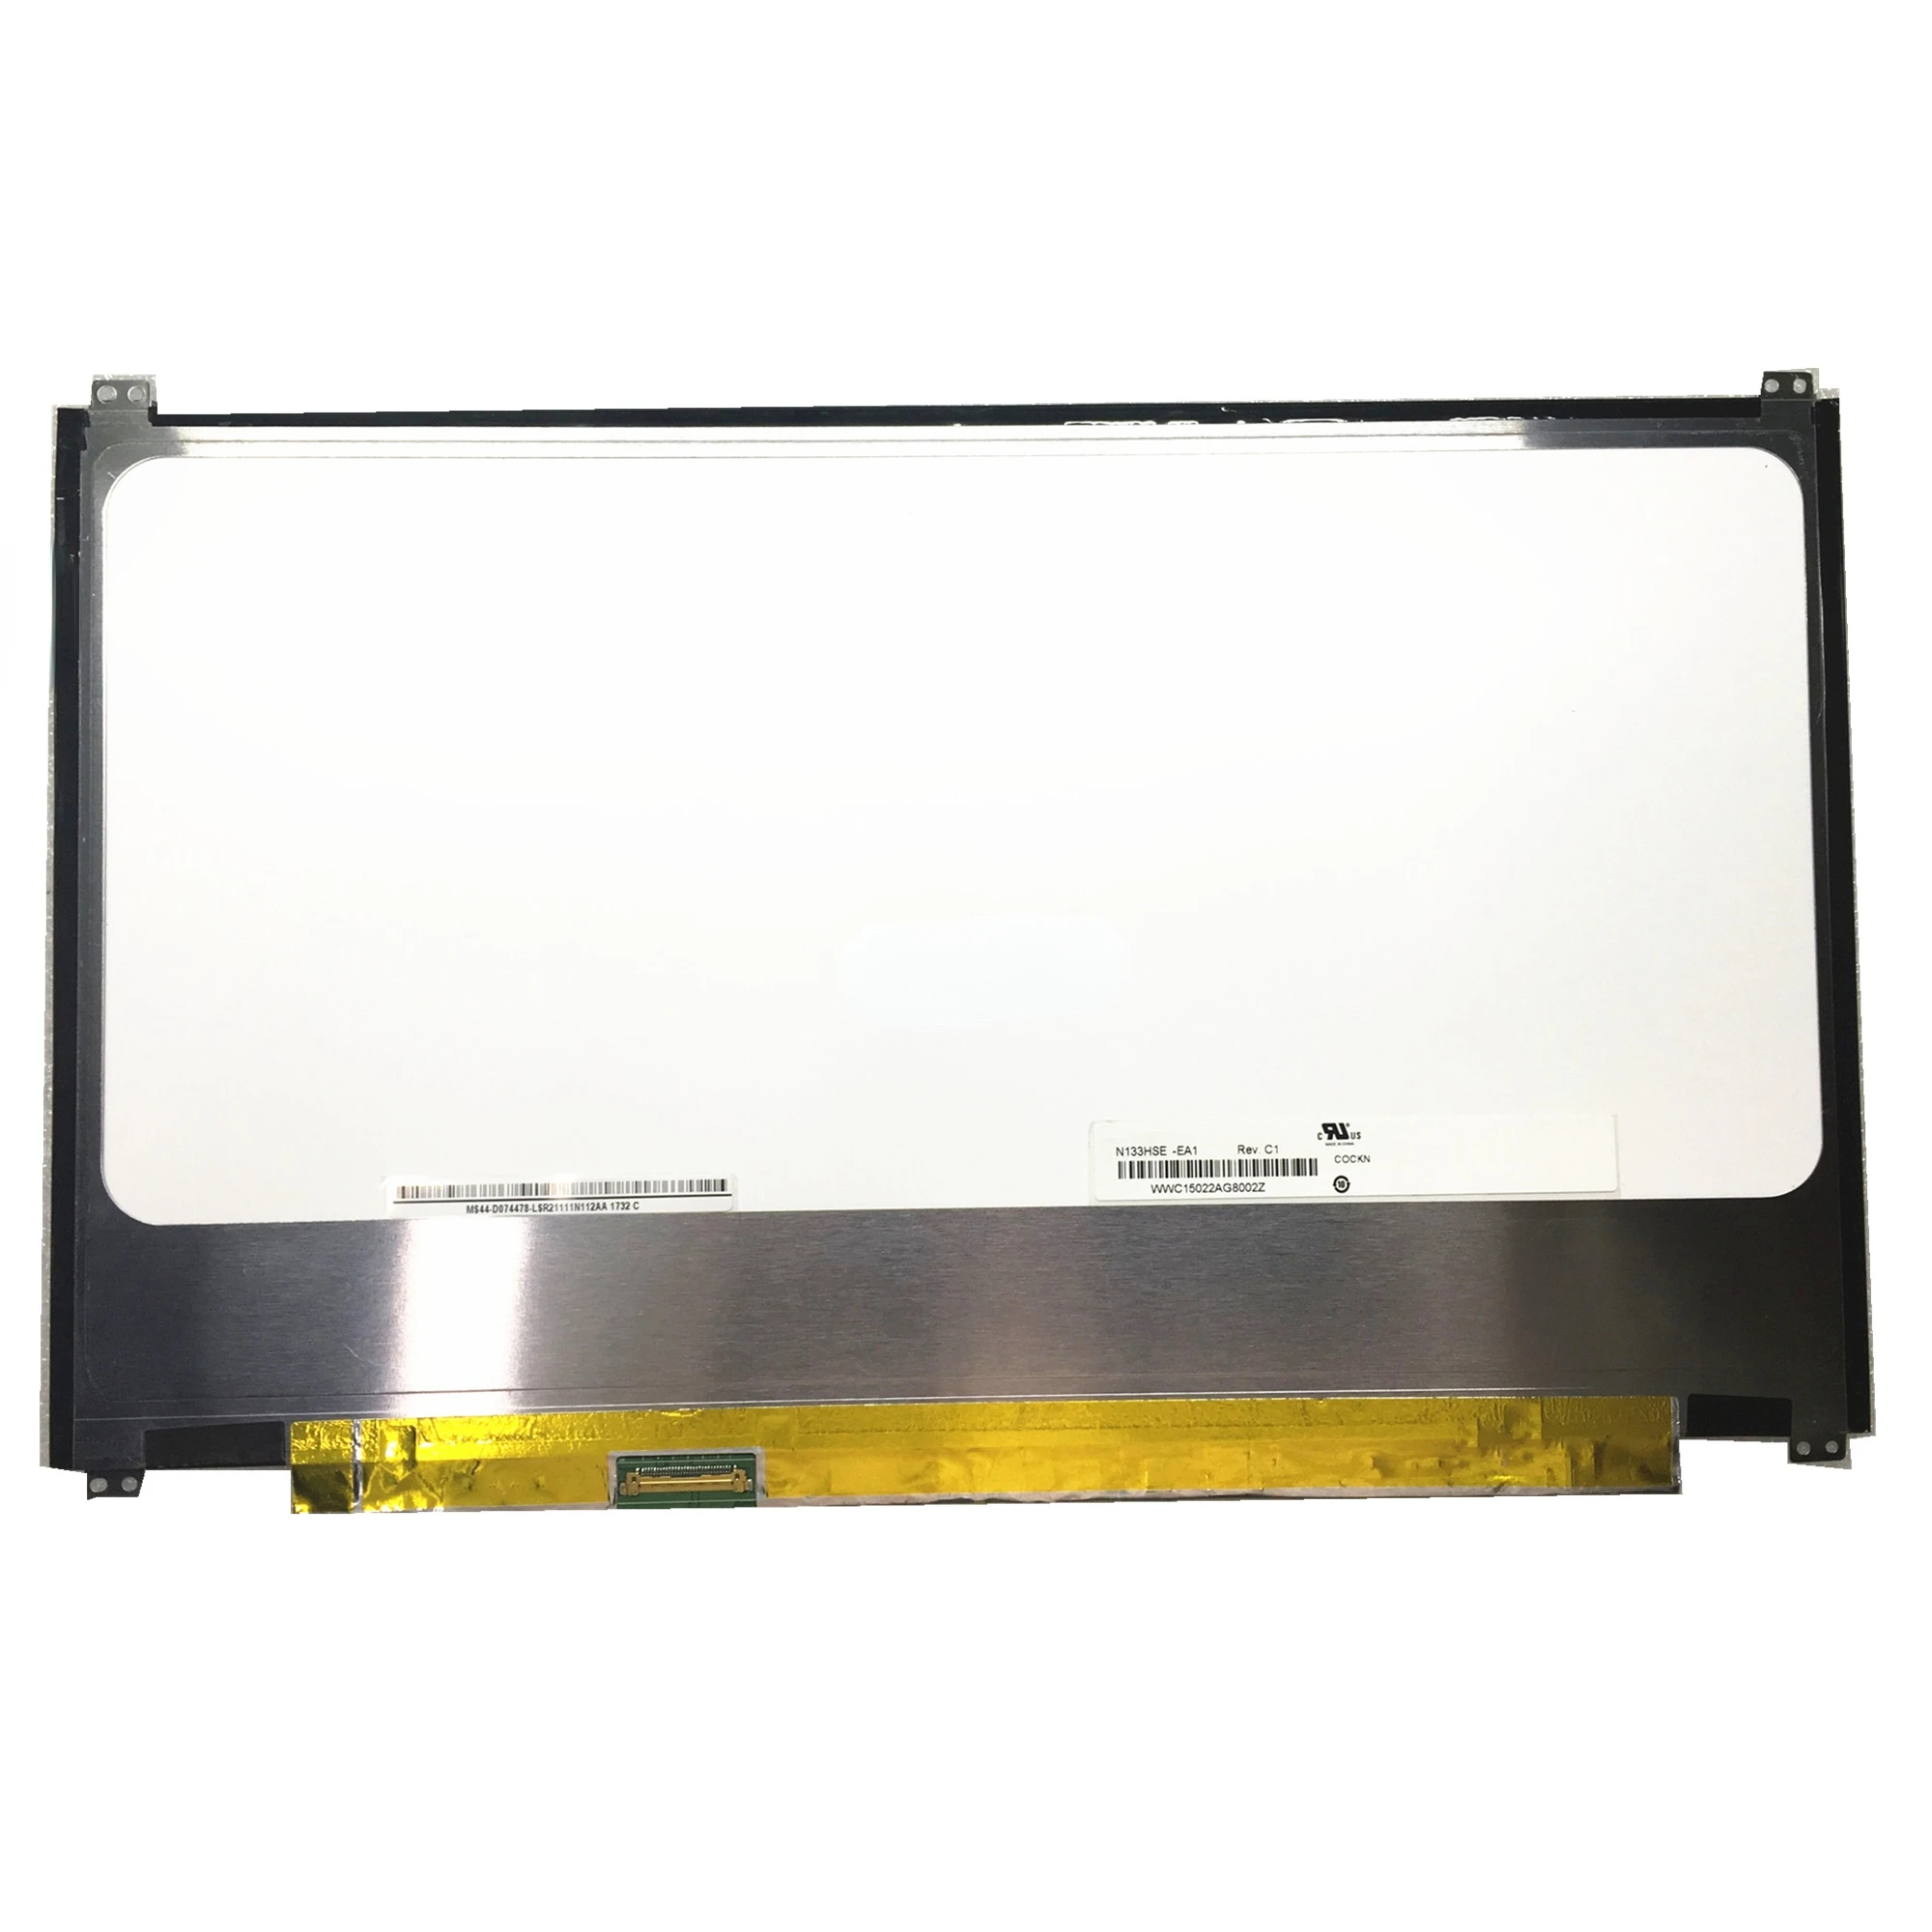 Free shipping N133HSE-EA1 for ASUS UX32 UX32VD UX31 UX31A UltraBook Laptop LCD LED screen 1920*1080 EDP 30pin